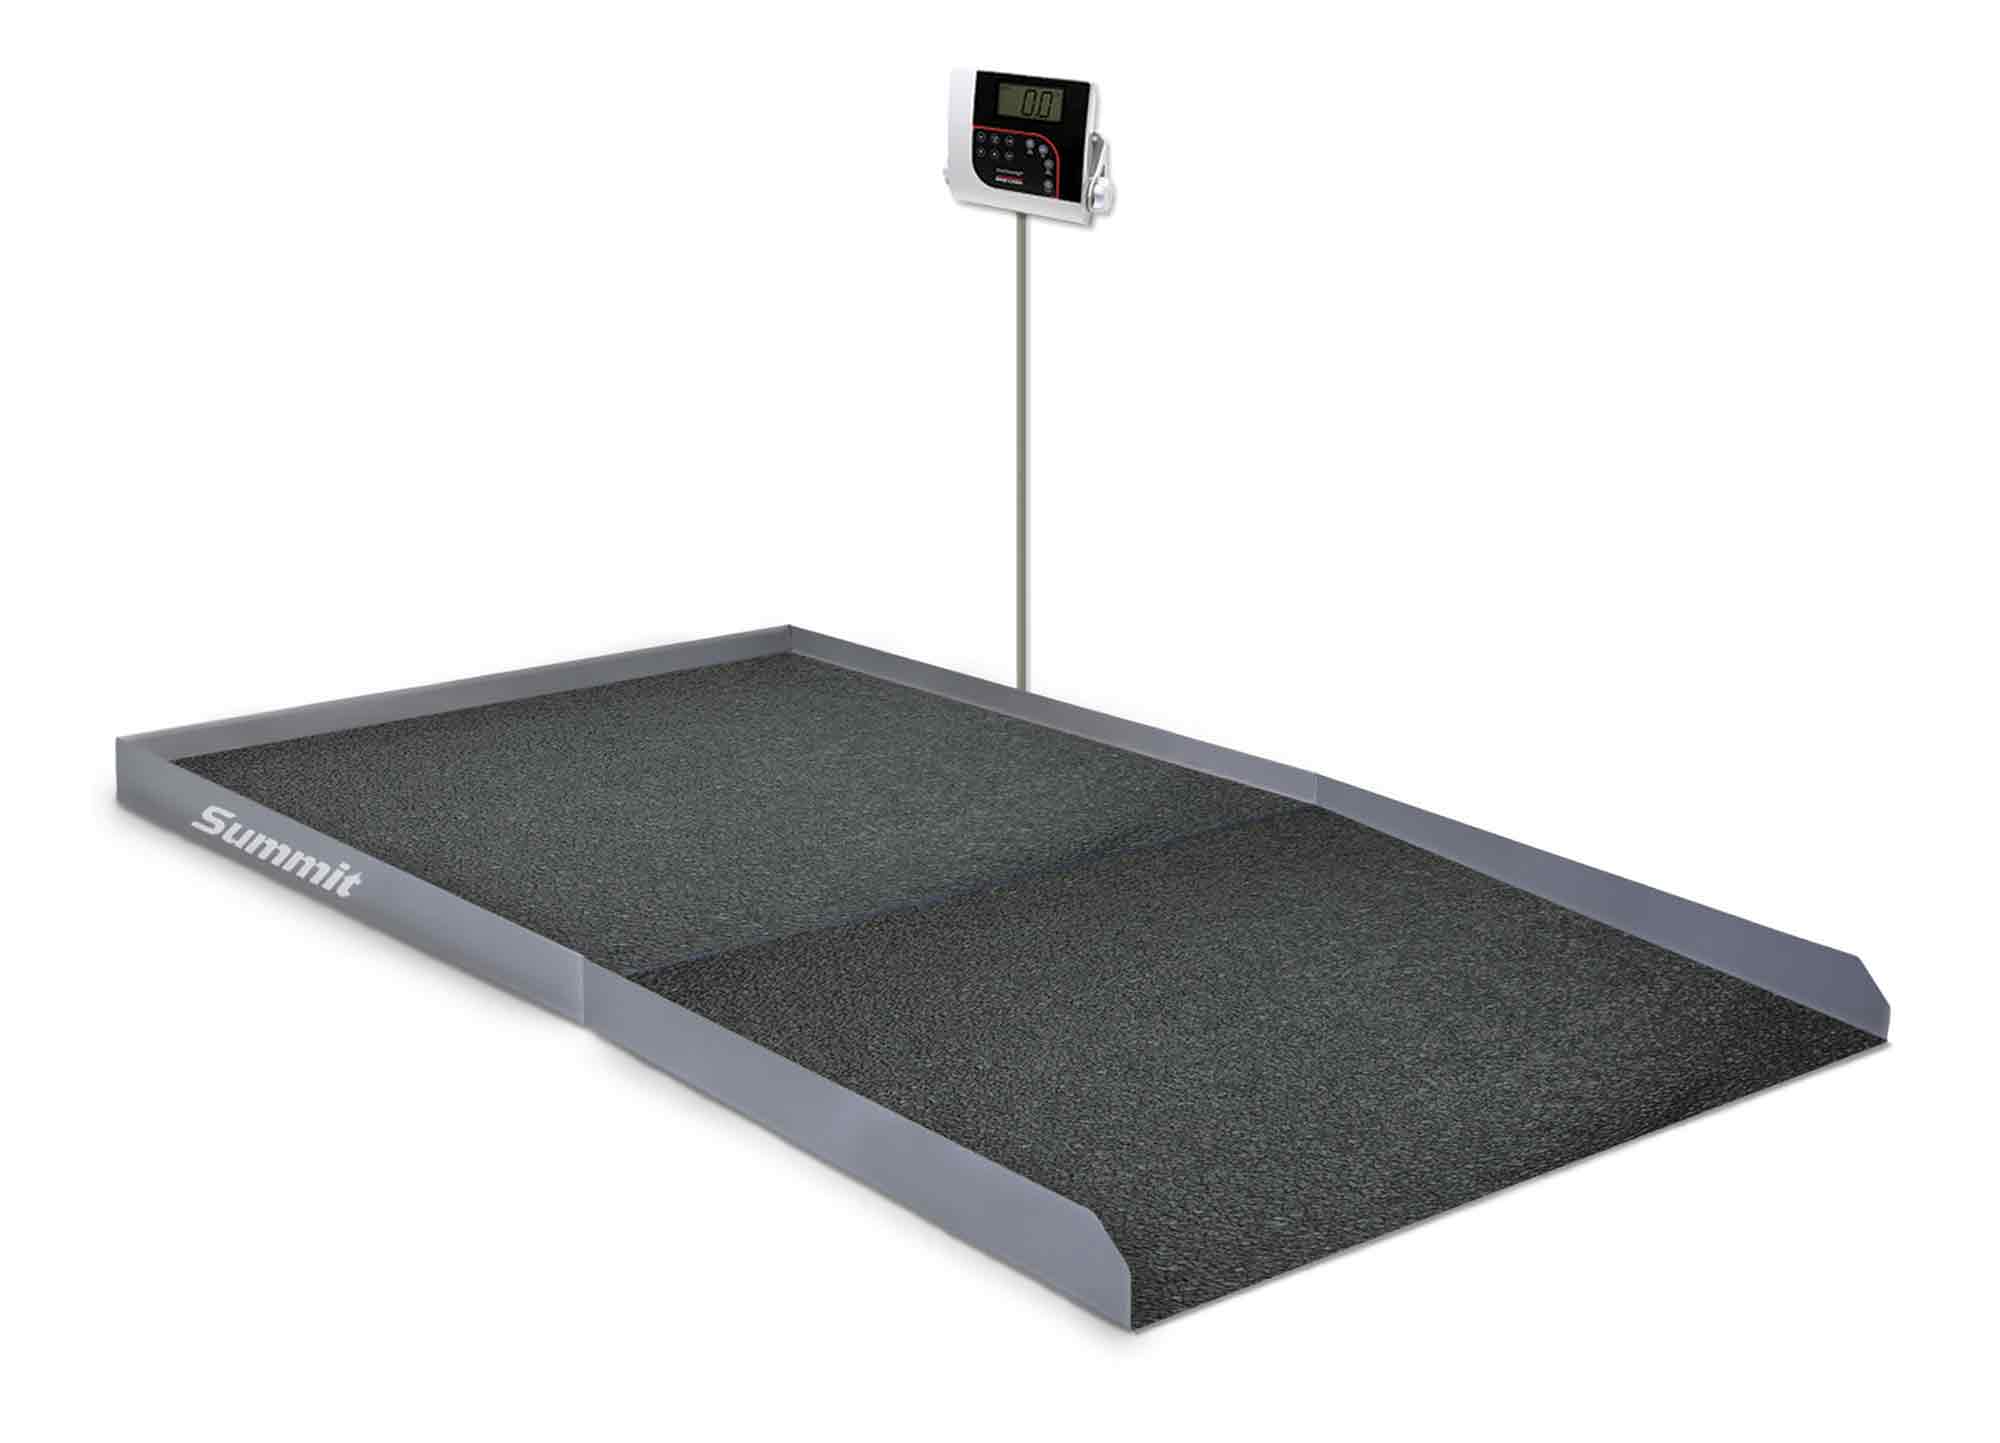 Rice Lake 150706 1000 LB SB-1150 Summit Bariatric Wheelchair Scale with 2 years Warranty